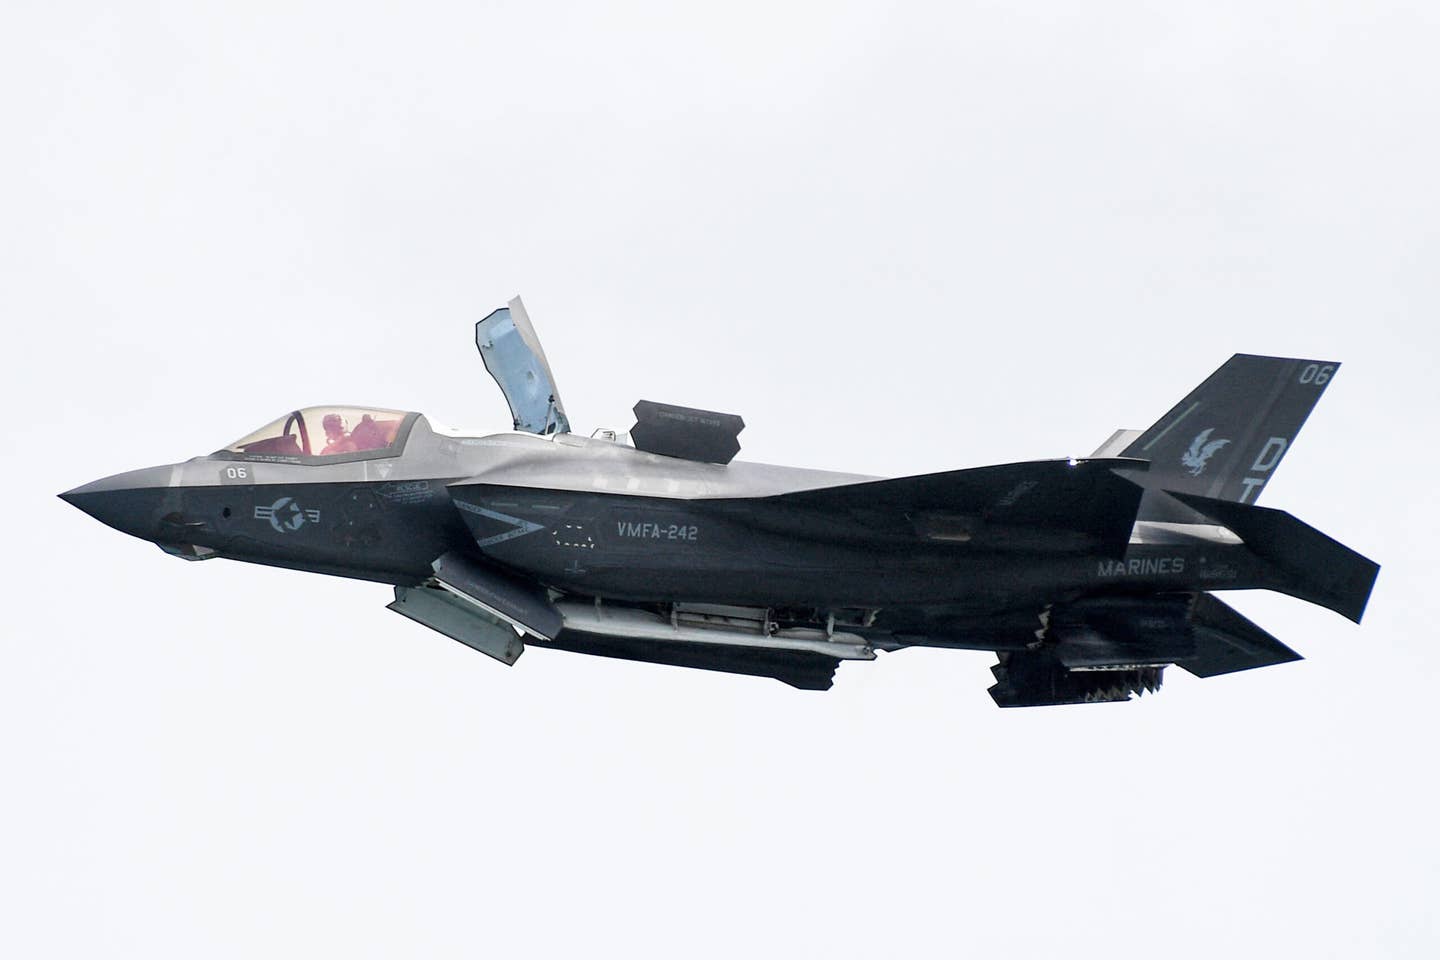 A U.S. Marine Corps F-35B performs during a preview of the Singapore Airshow on February 13, 2022. <em>Photo by ROSLAN RAHMAN/AFP via Getty Images</em>